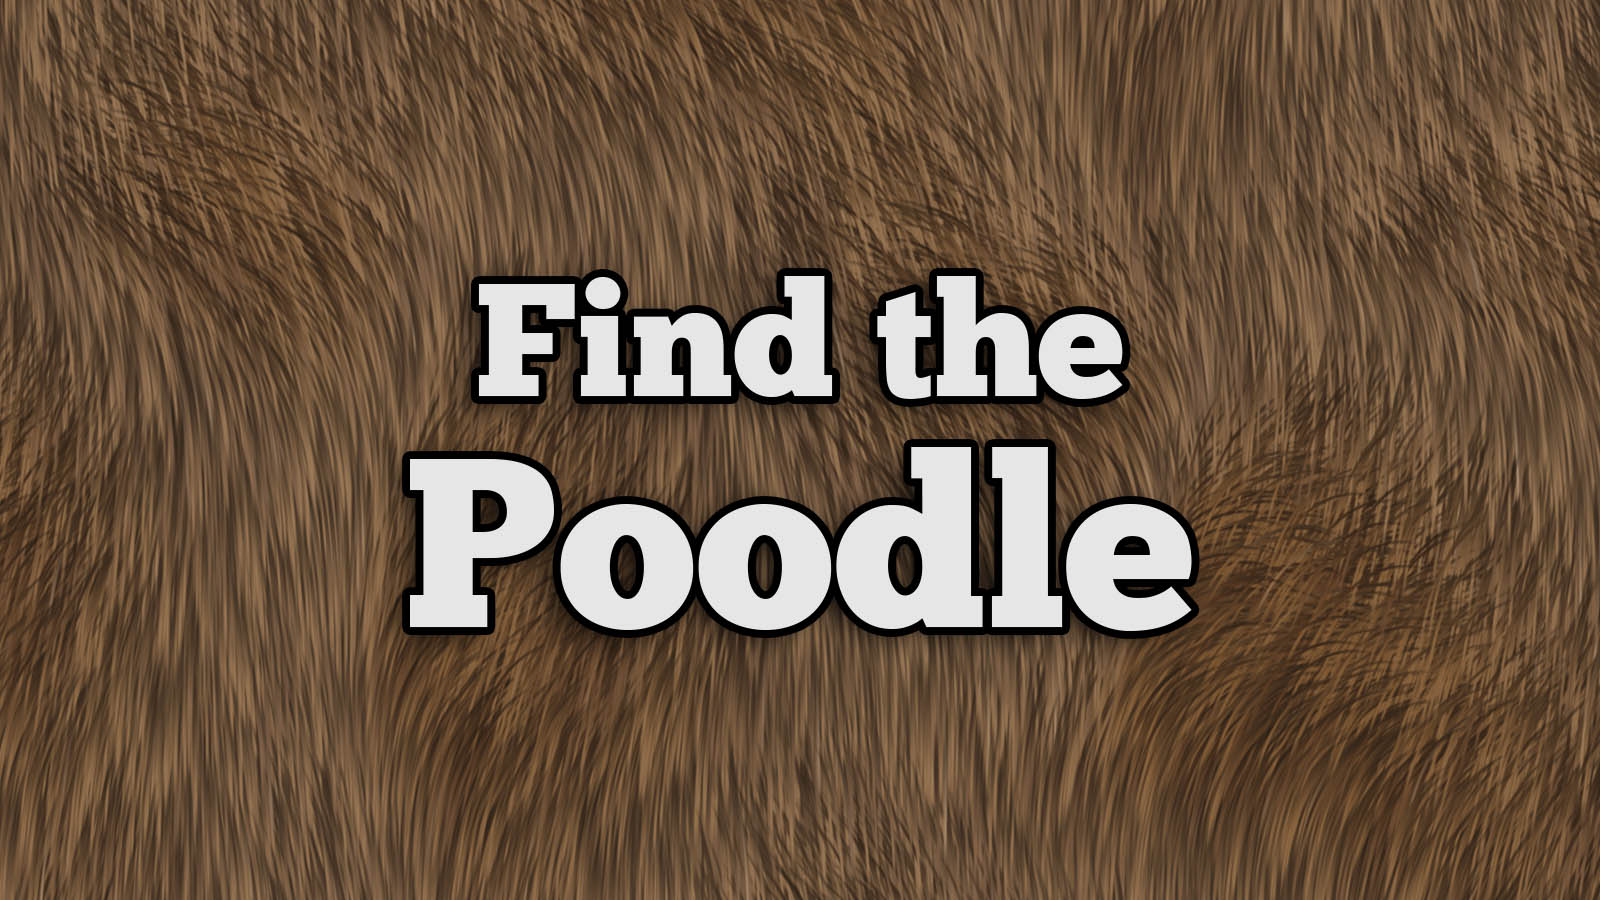 We Bet You Can’t Identify More Than 20/27 of These Dog Breeds Text Poodle